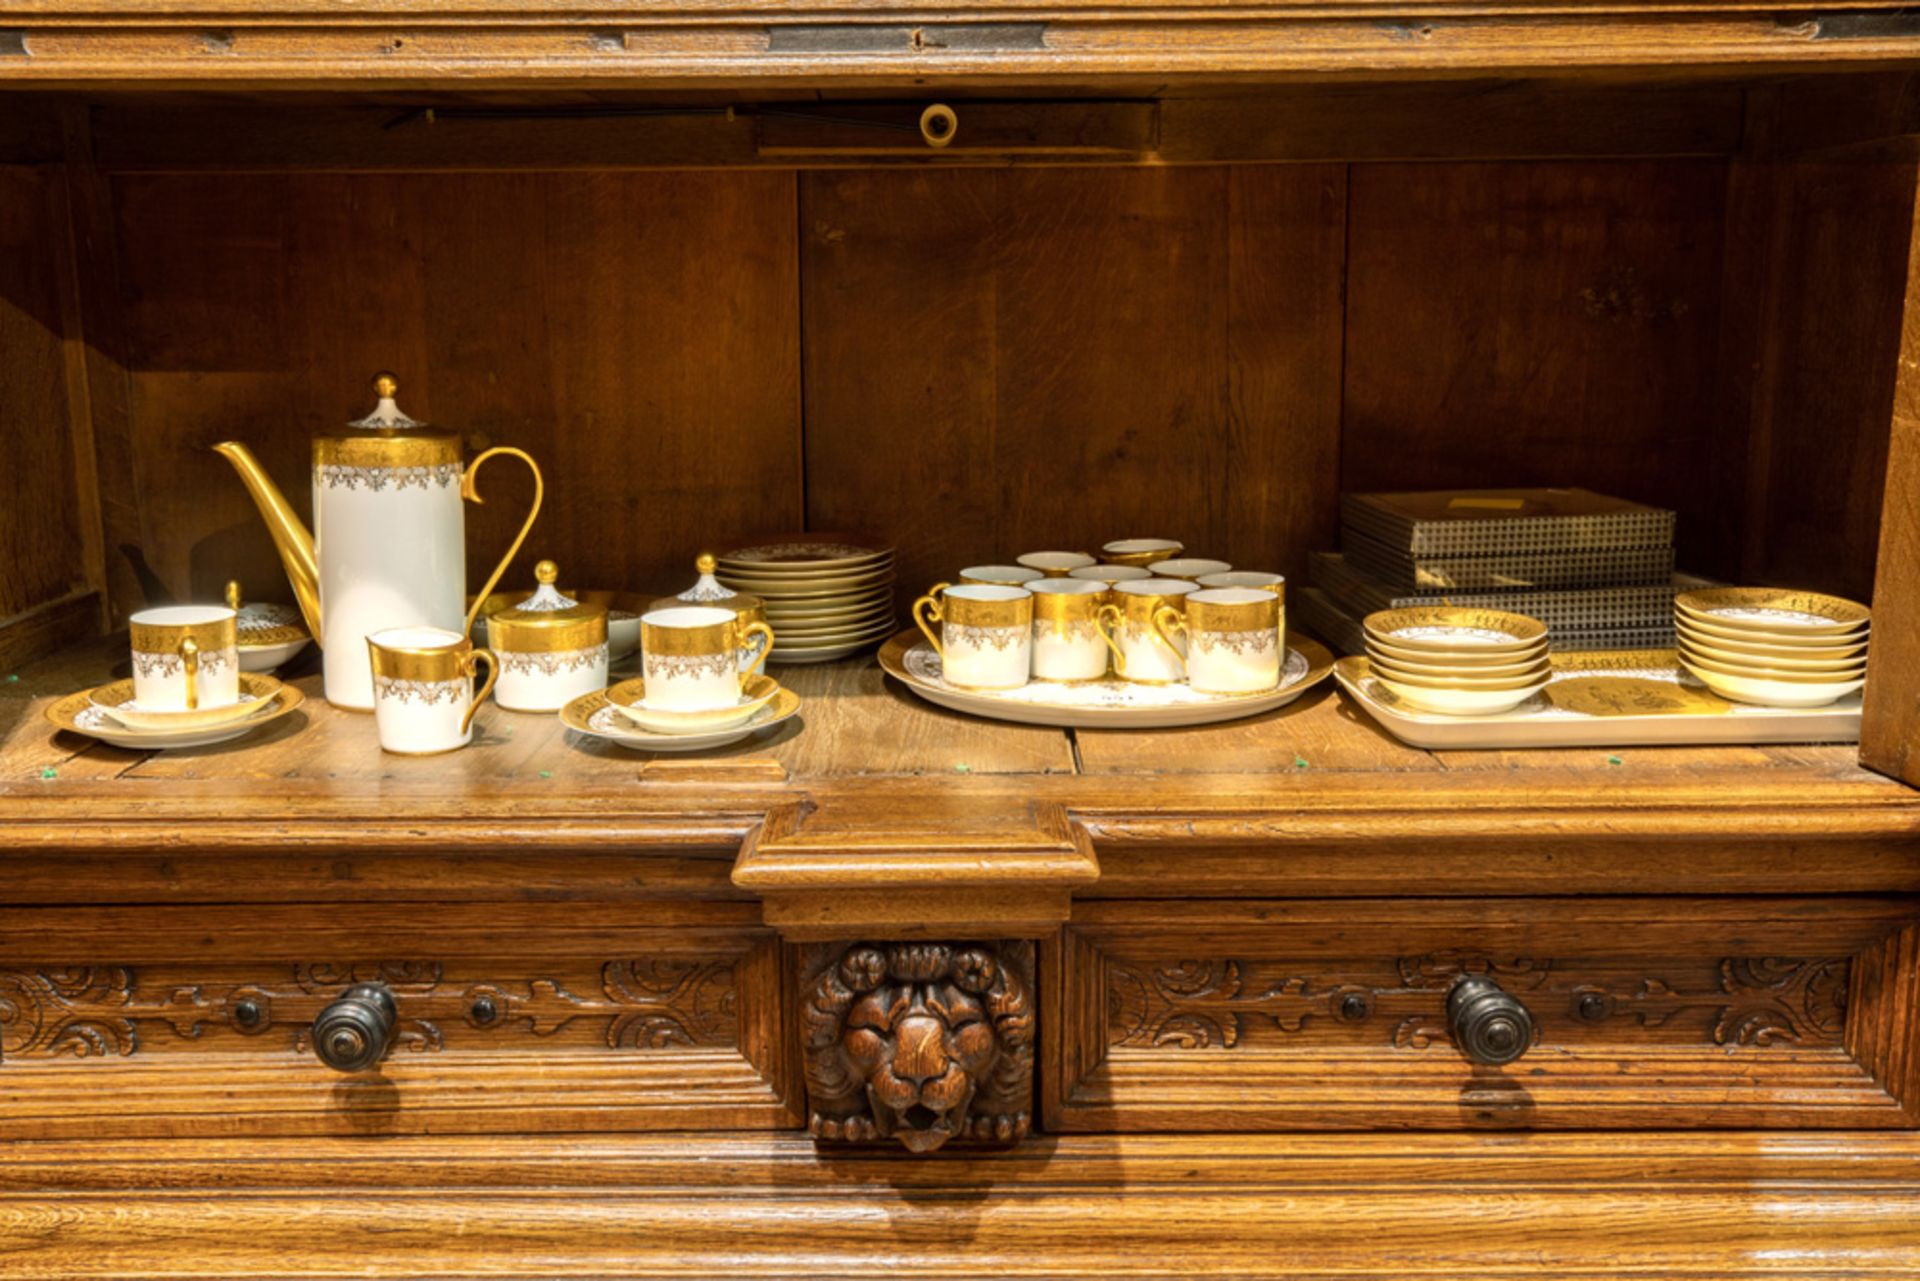 45 pcs coffee set in marked porcelain with a gilt decor - sold with some "vermeil" cutlery || Vrij - Bild 5 aus 5